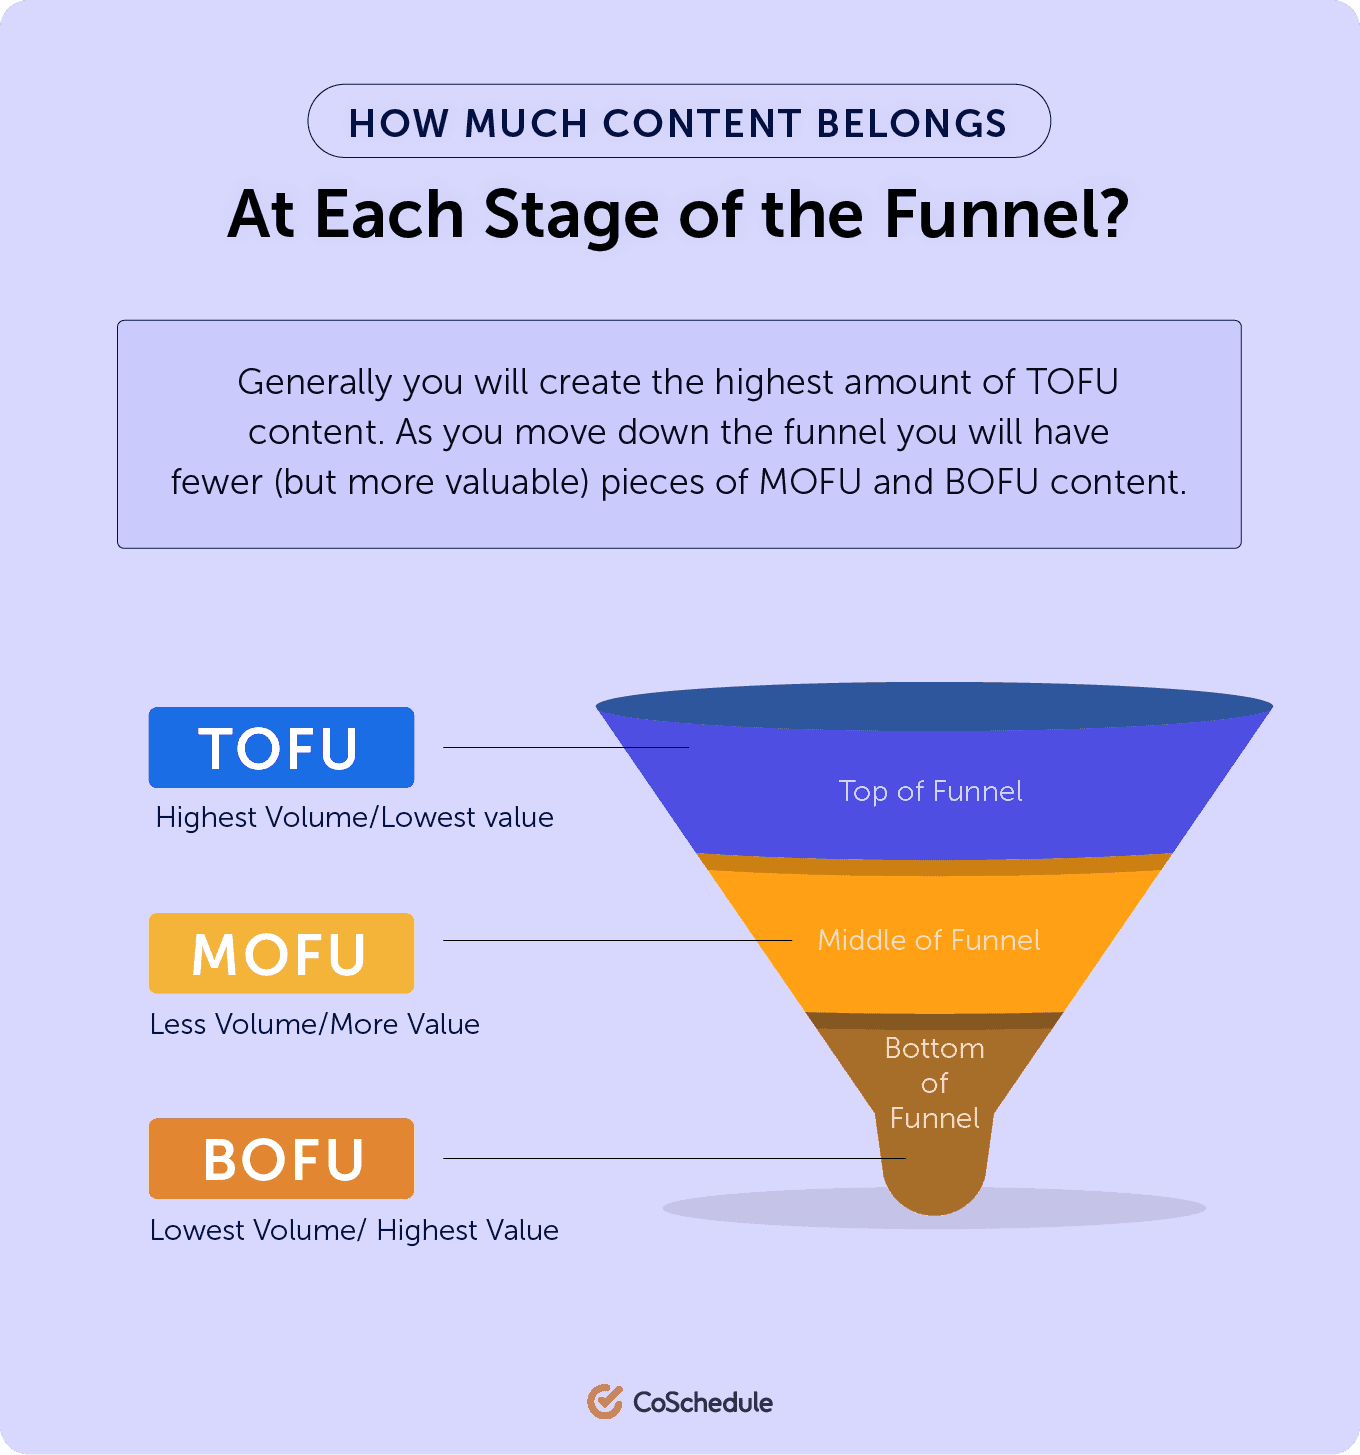 "How Much Content Belongs At Each Stage of the Funnel?" from CoSchedule